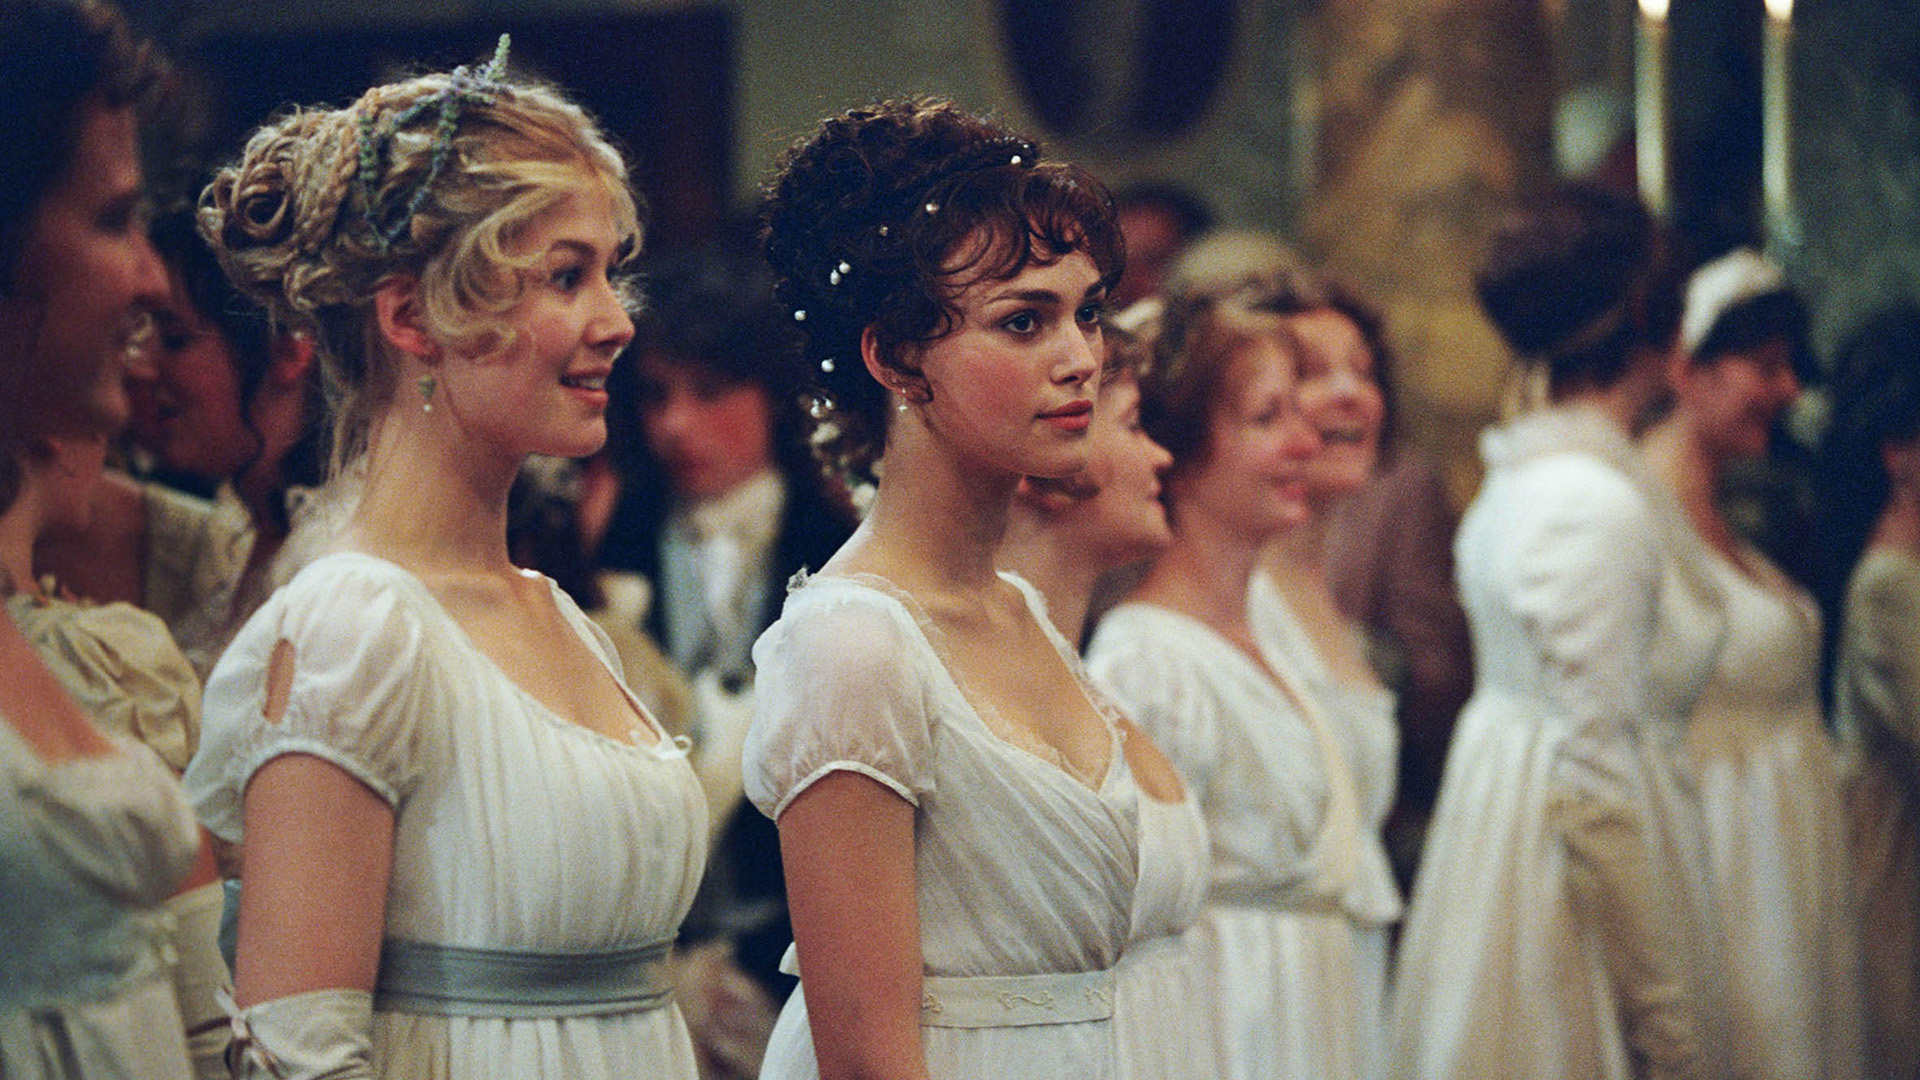 Jane Austen's Adaptations: A Ranking of the Top 5 Most Swoon-Worthy Versions